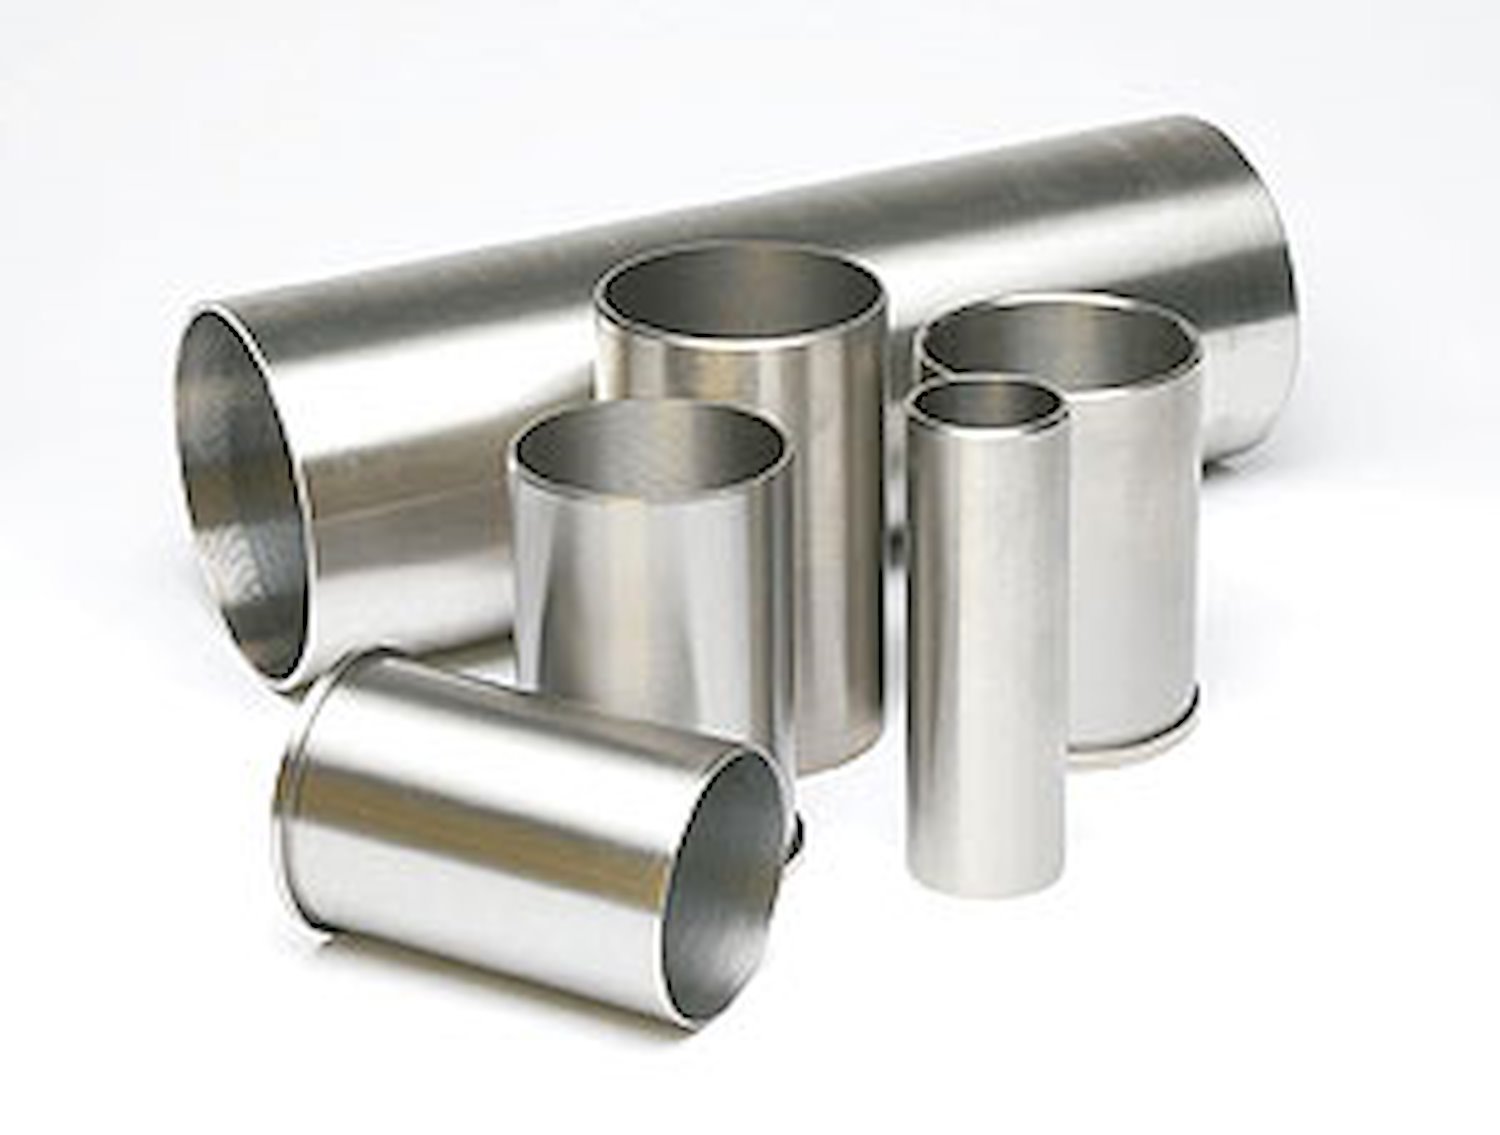 Cylinder Sleeve Bore: 2.8740" Length: 5-1/4" Wall Thickness: 1/8"